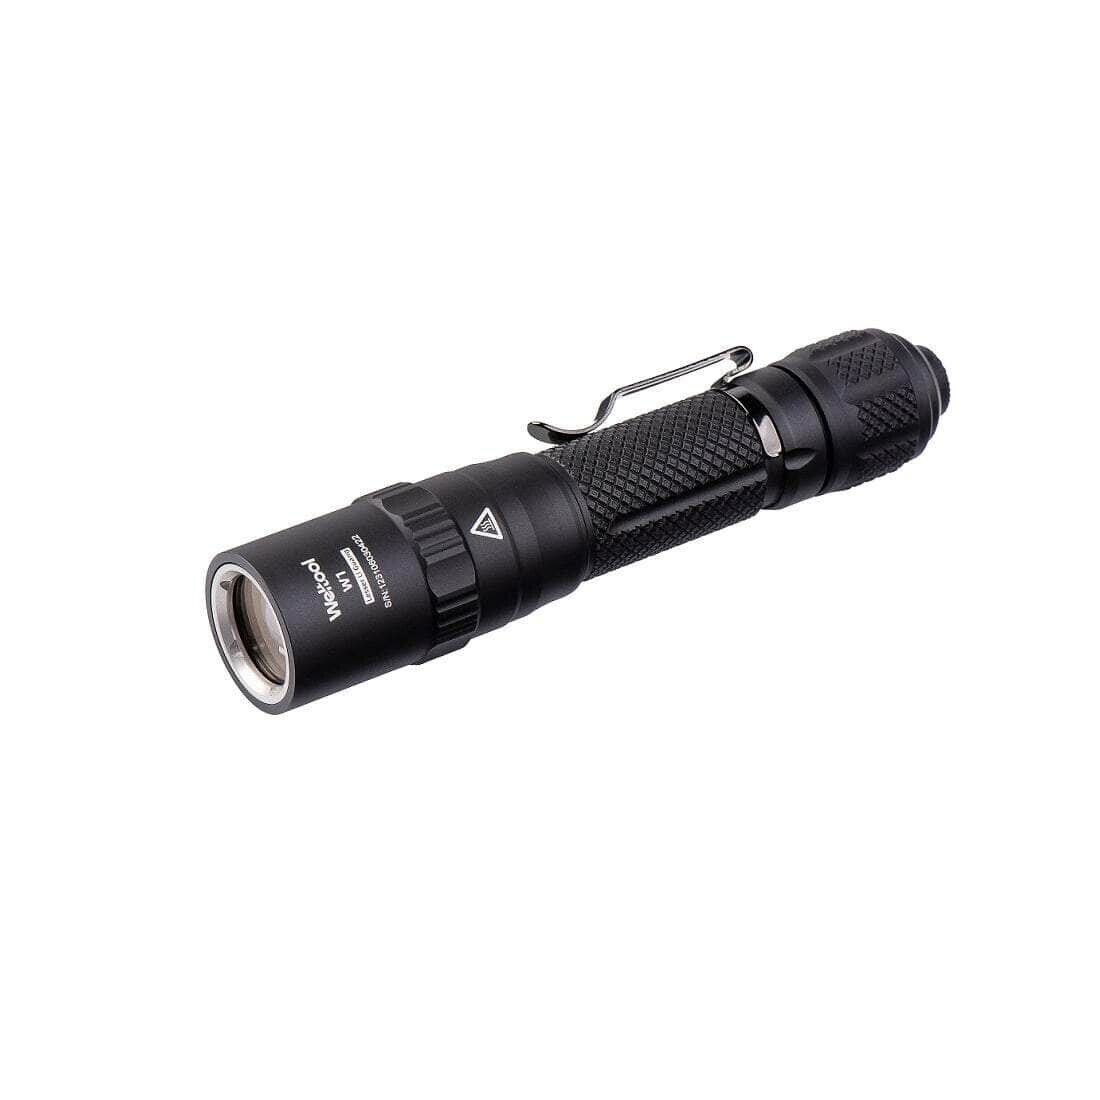 Weltool W1 LEP Flashlight 630LM 18650 Battery Powerful Torch with Spill